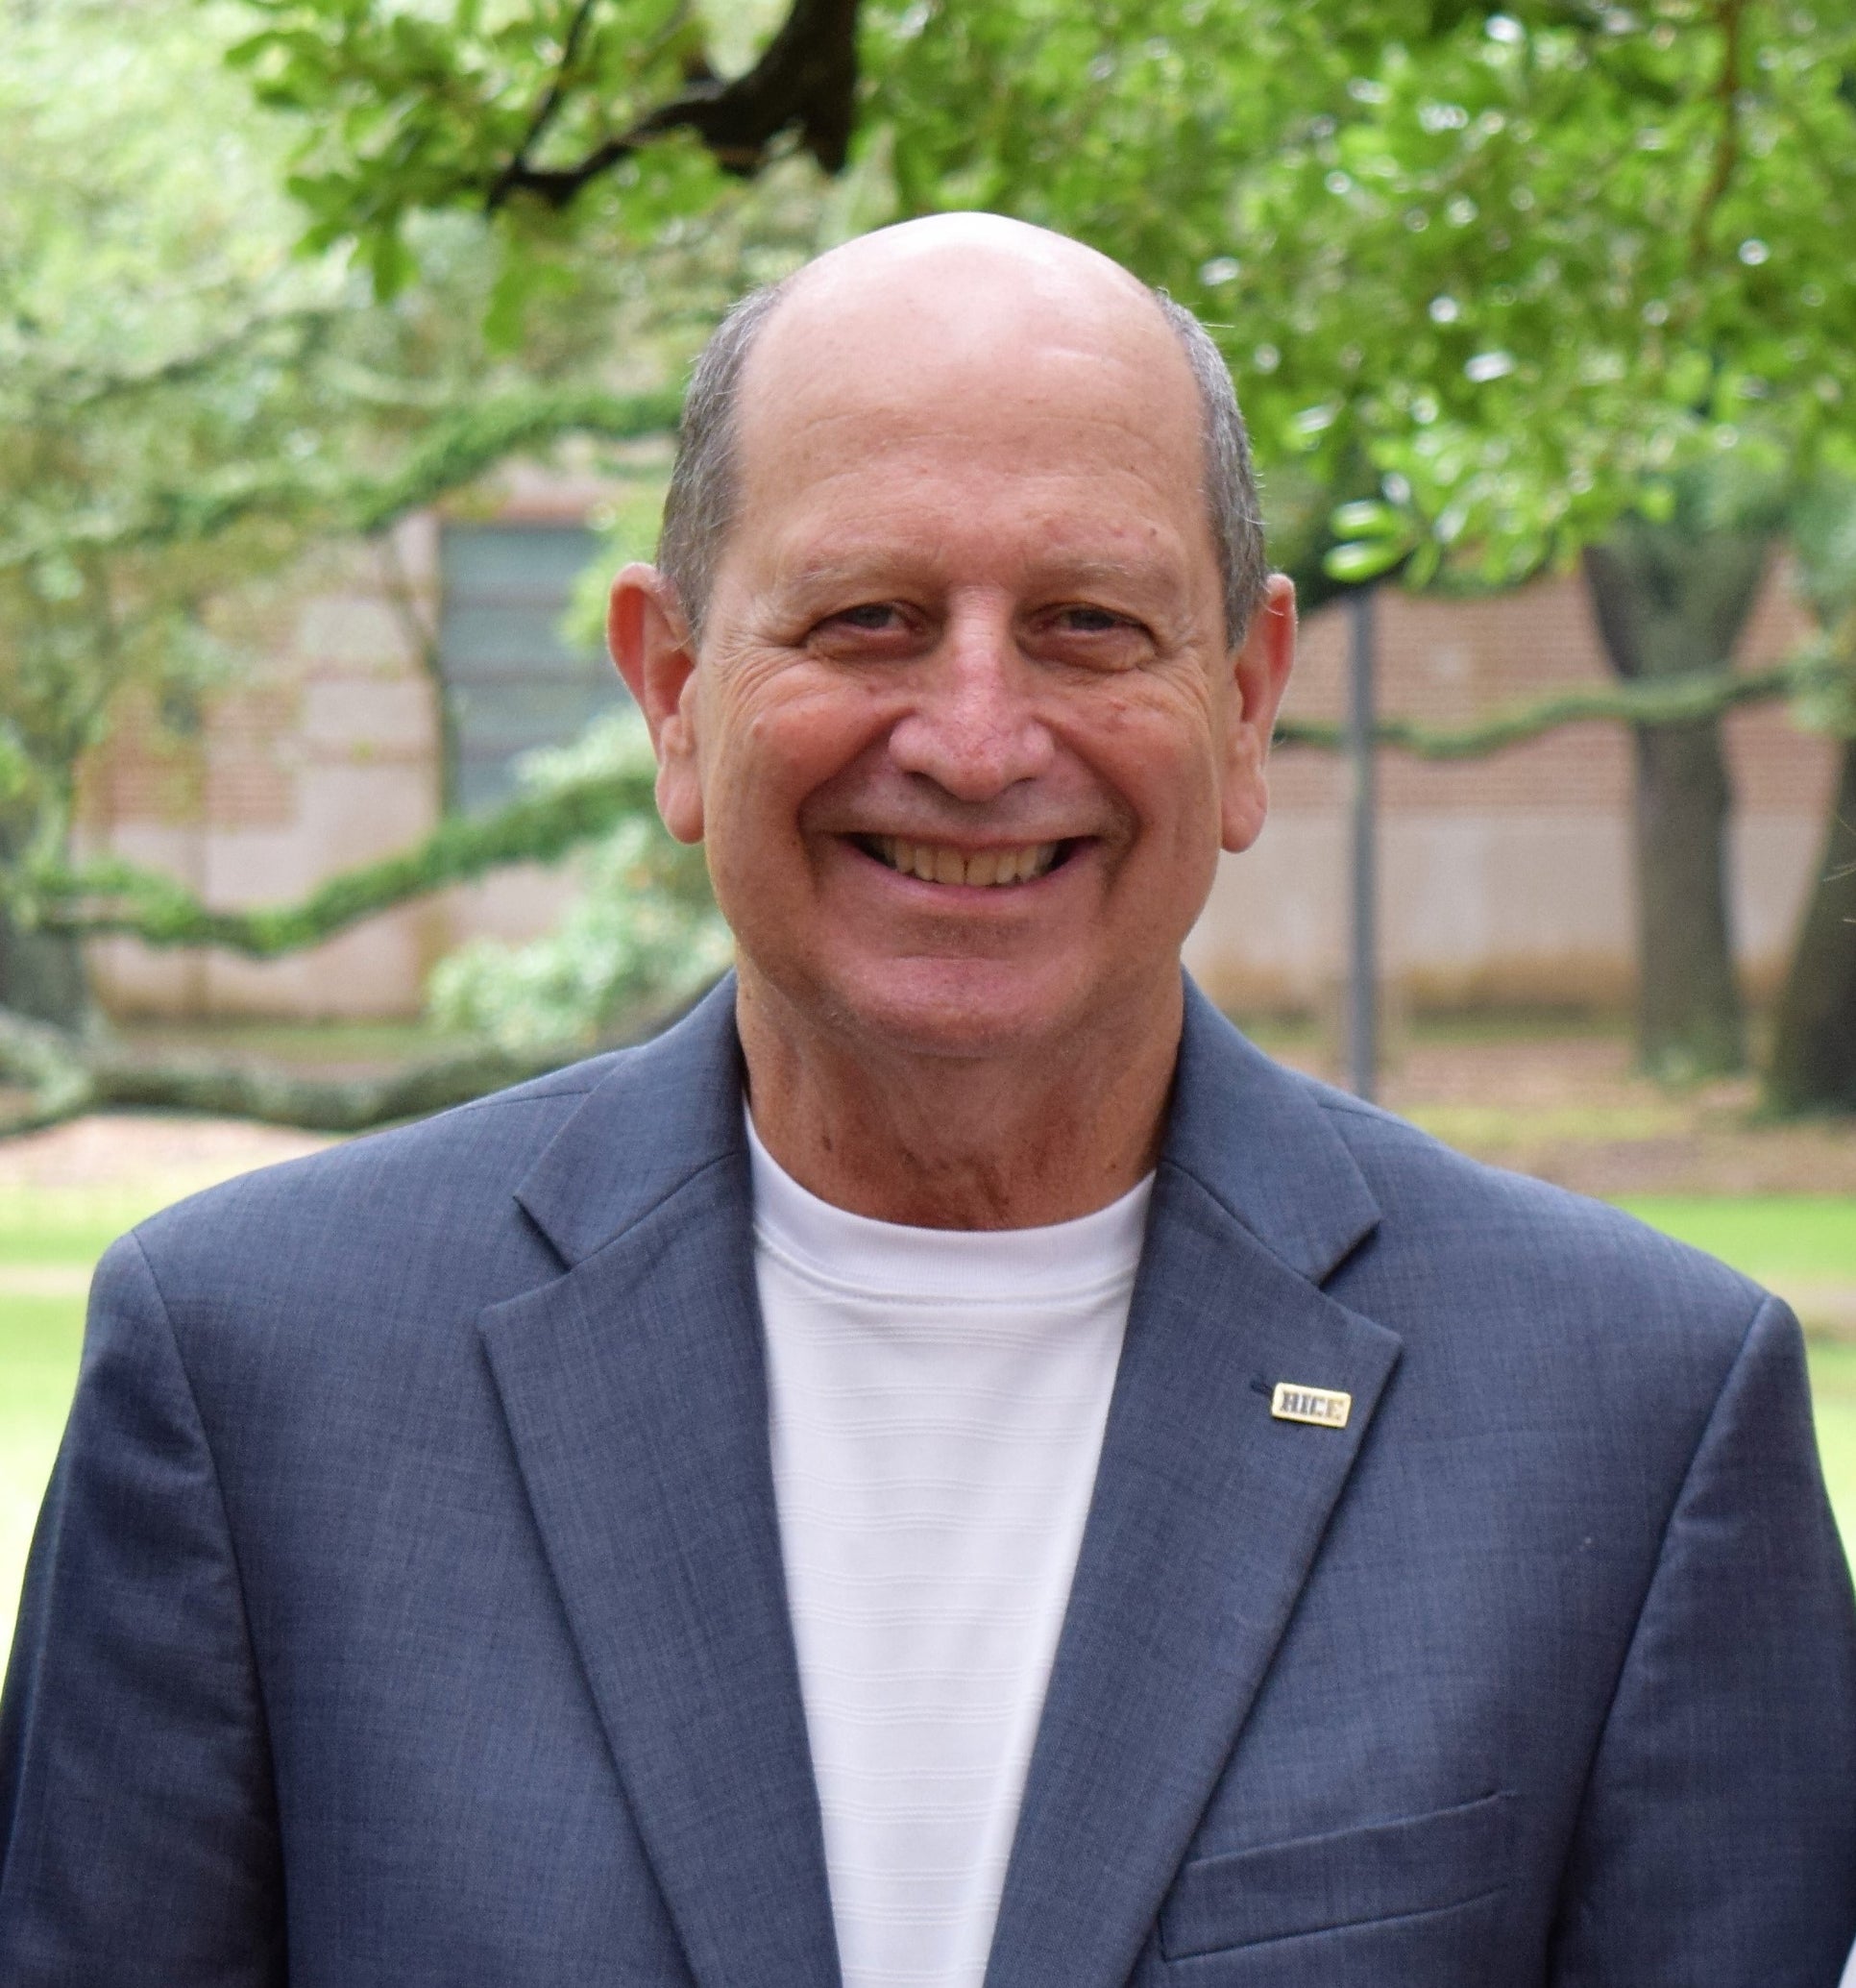 Dr. Disch retires after 48-years at Rice